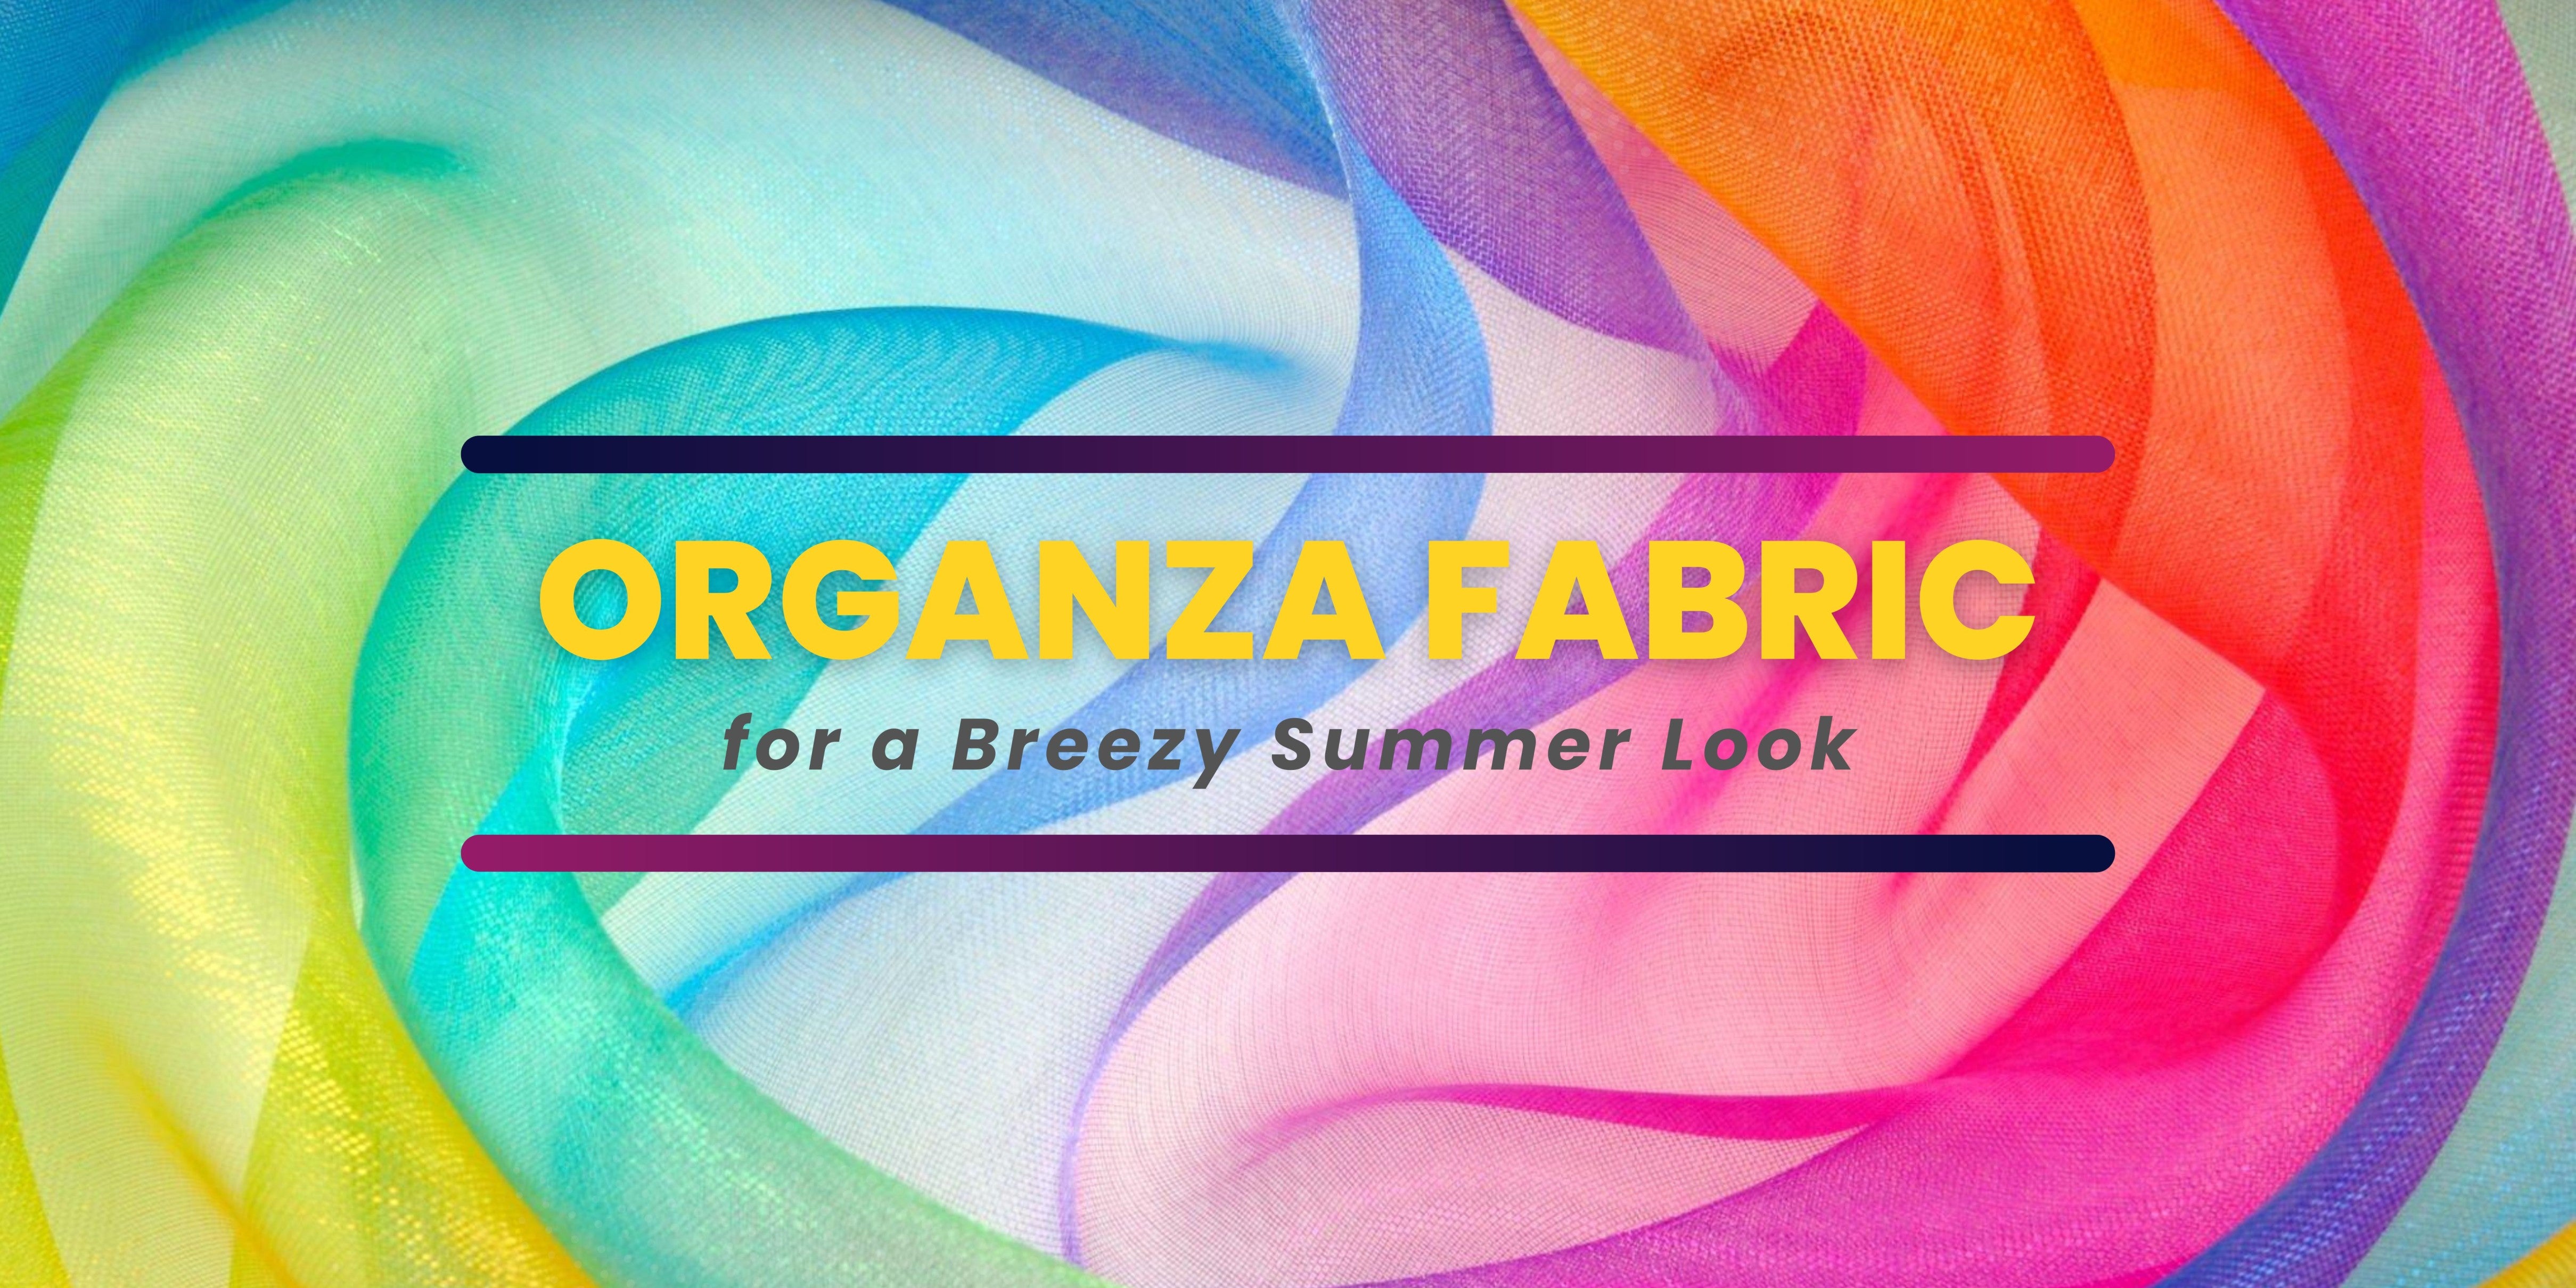 12 Tips to Style Organza Fabric for a Breezy Summer Look